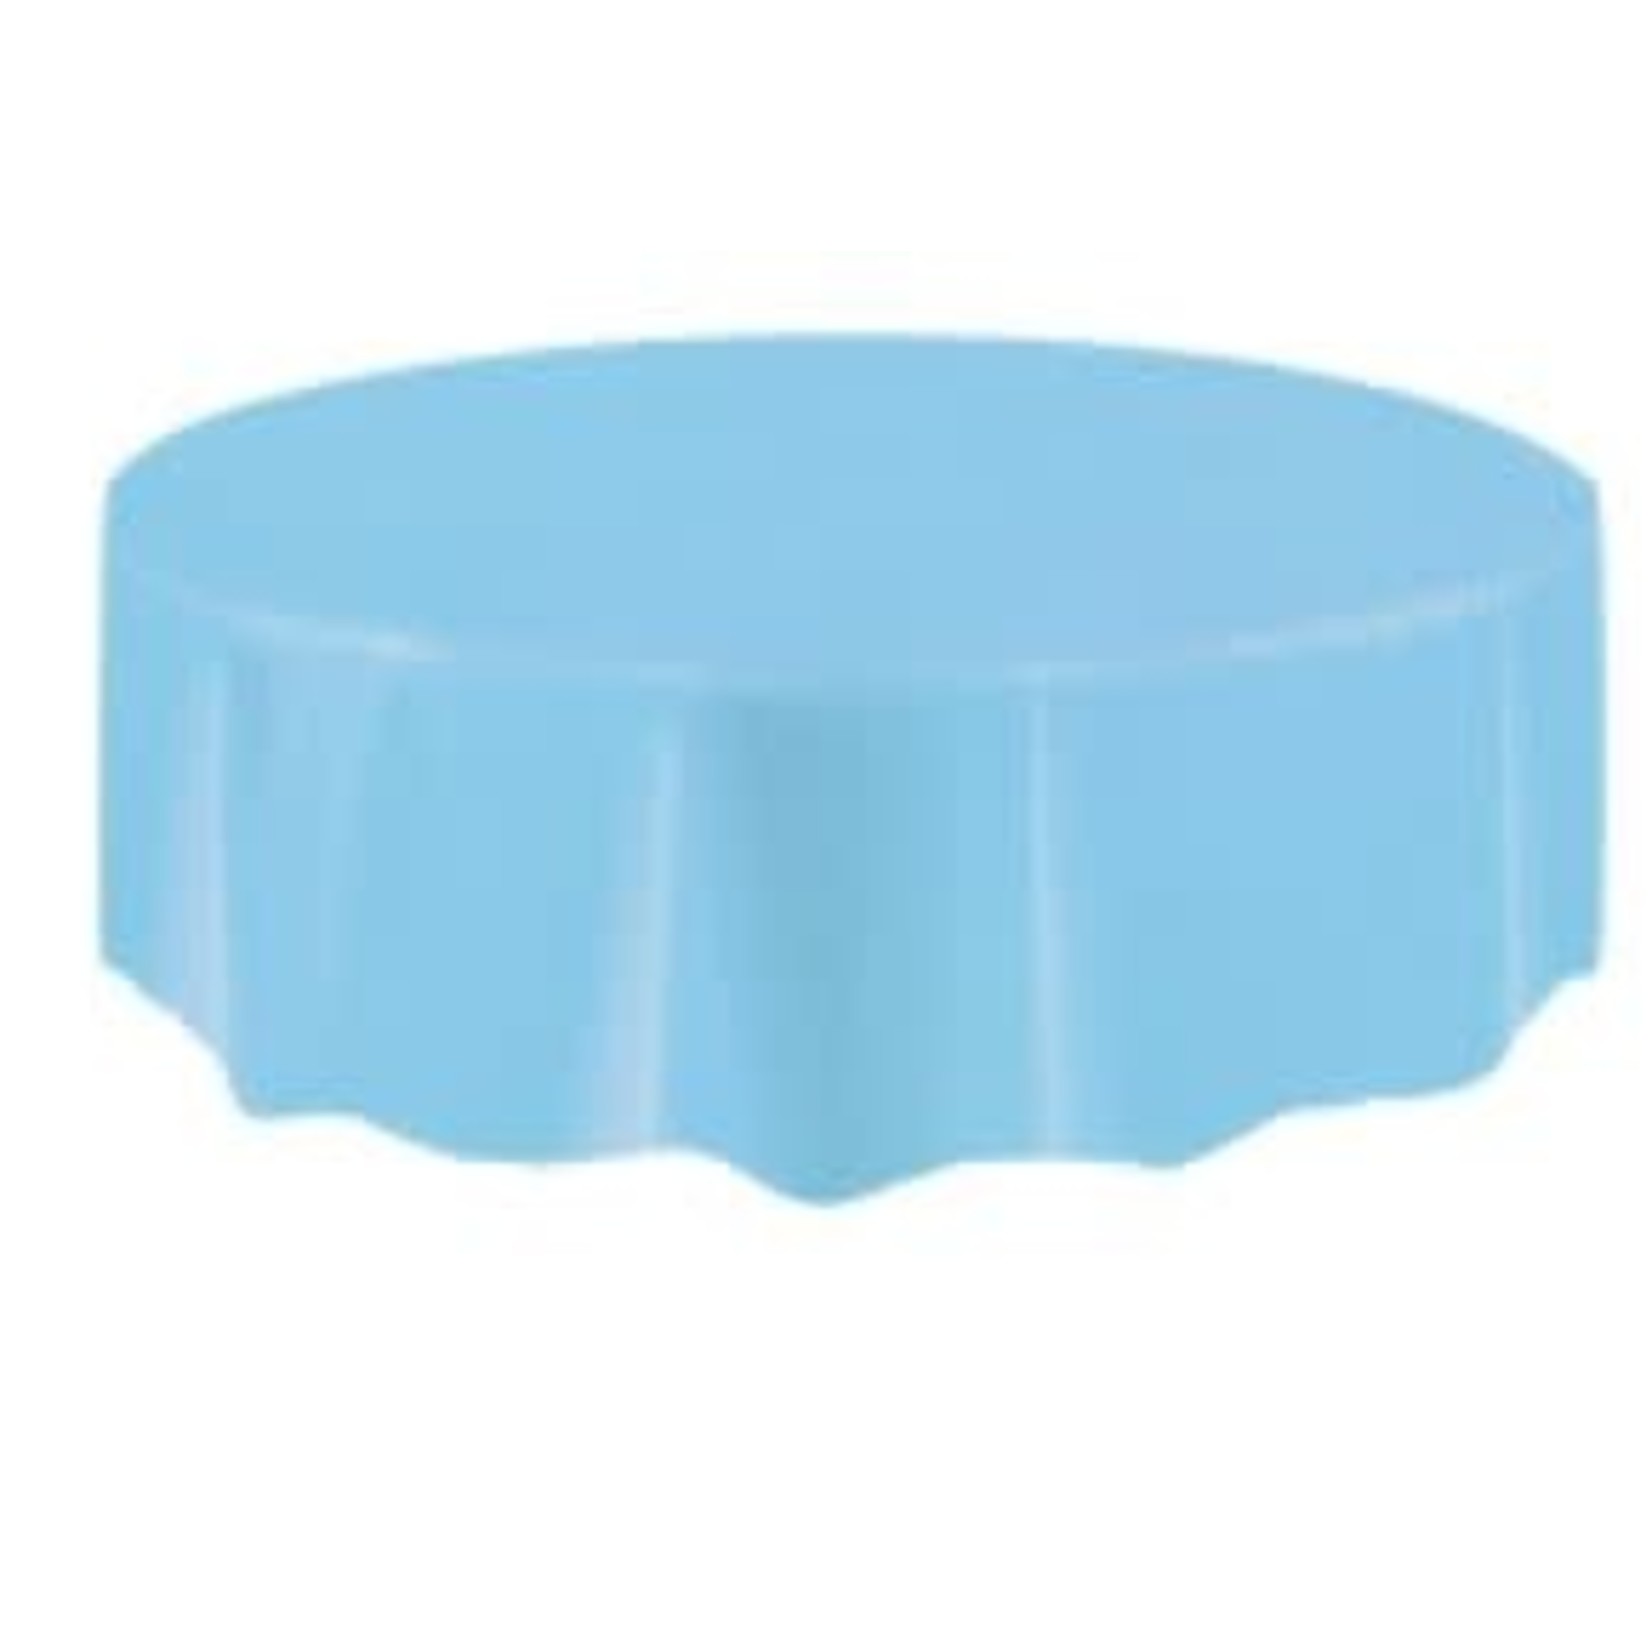 Powder Blue Solid Round Plastic Table Cover  84"